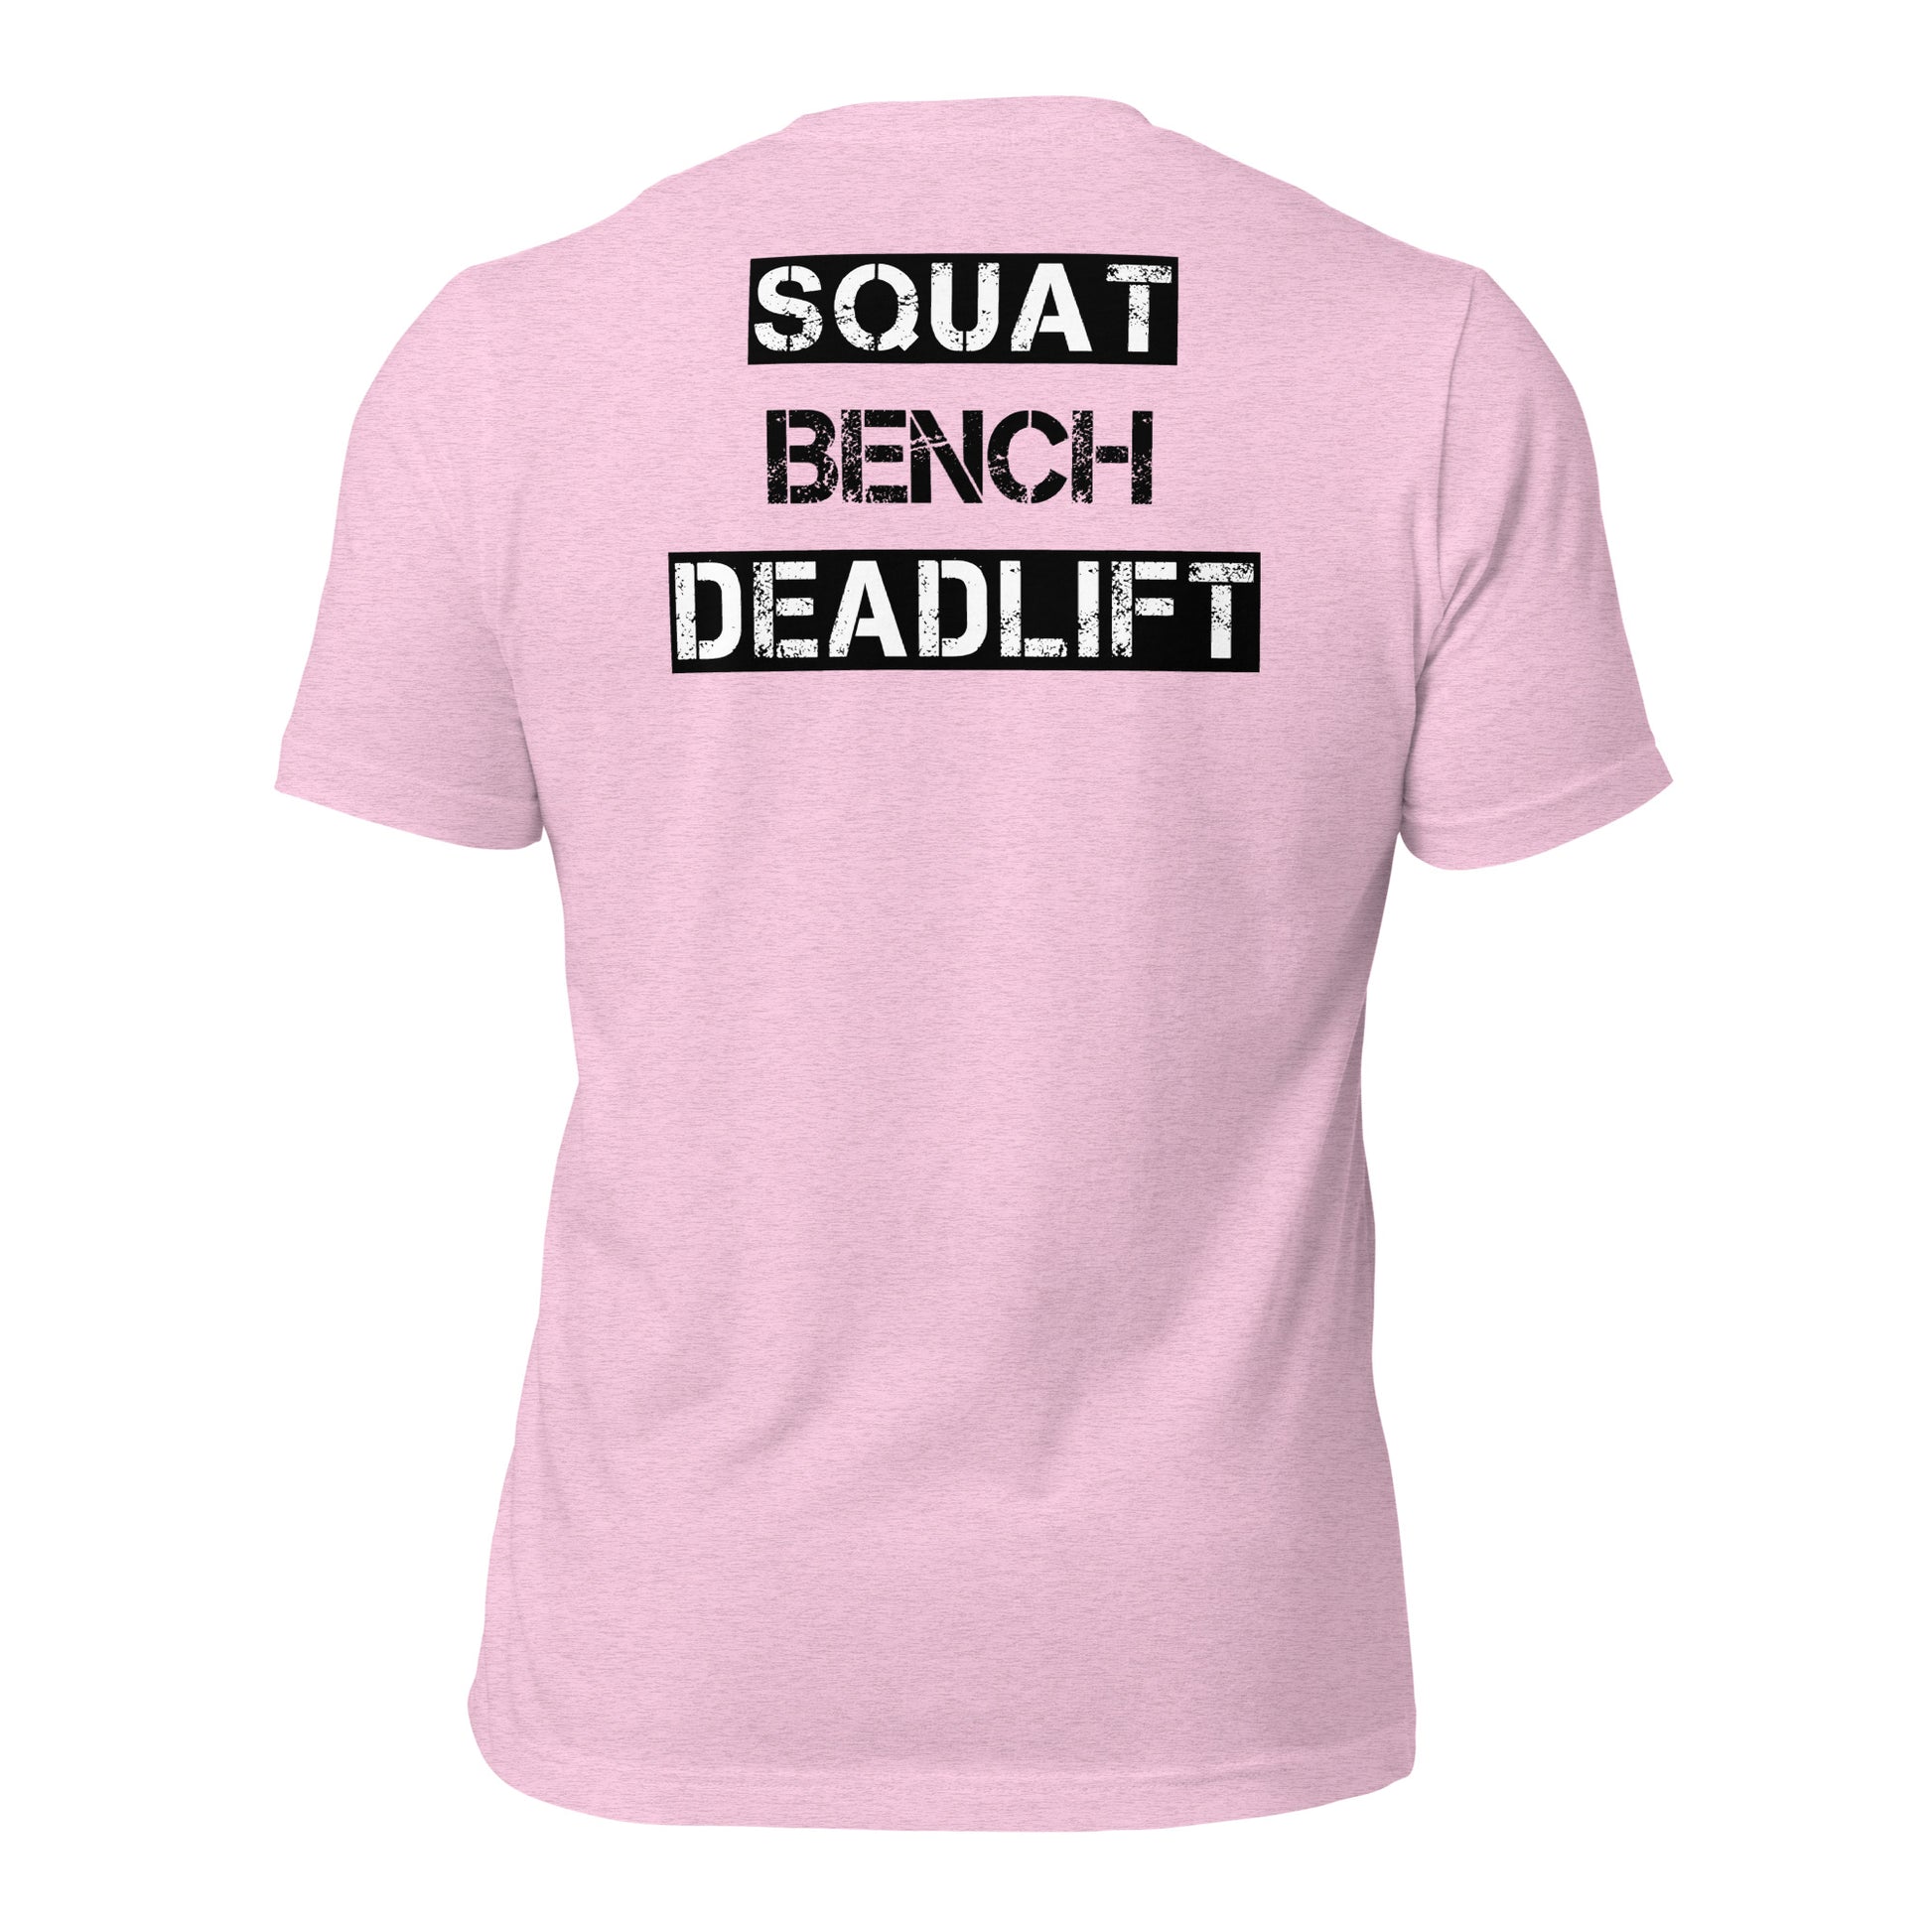 Squat Bench Deadlift (SBD) Shirt - Back - in Heather Prism Lilac